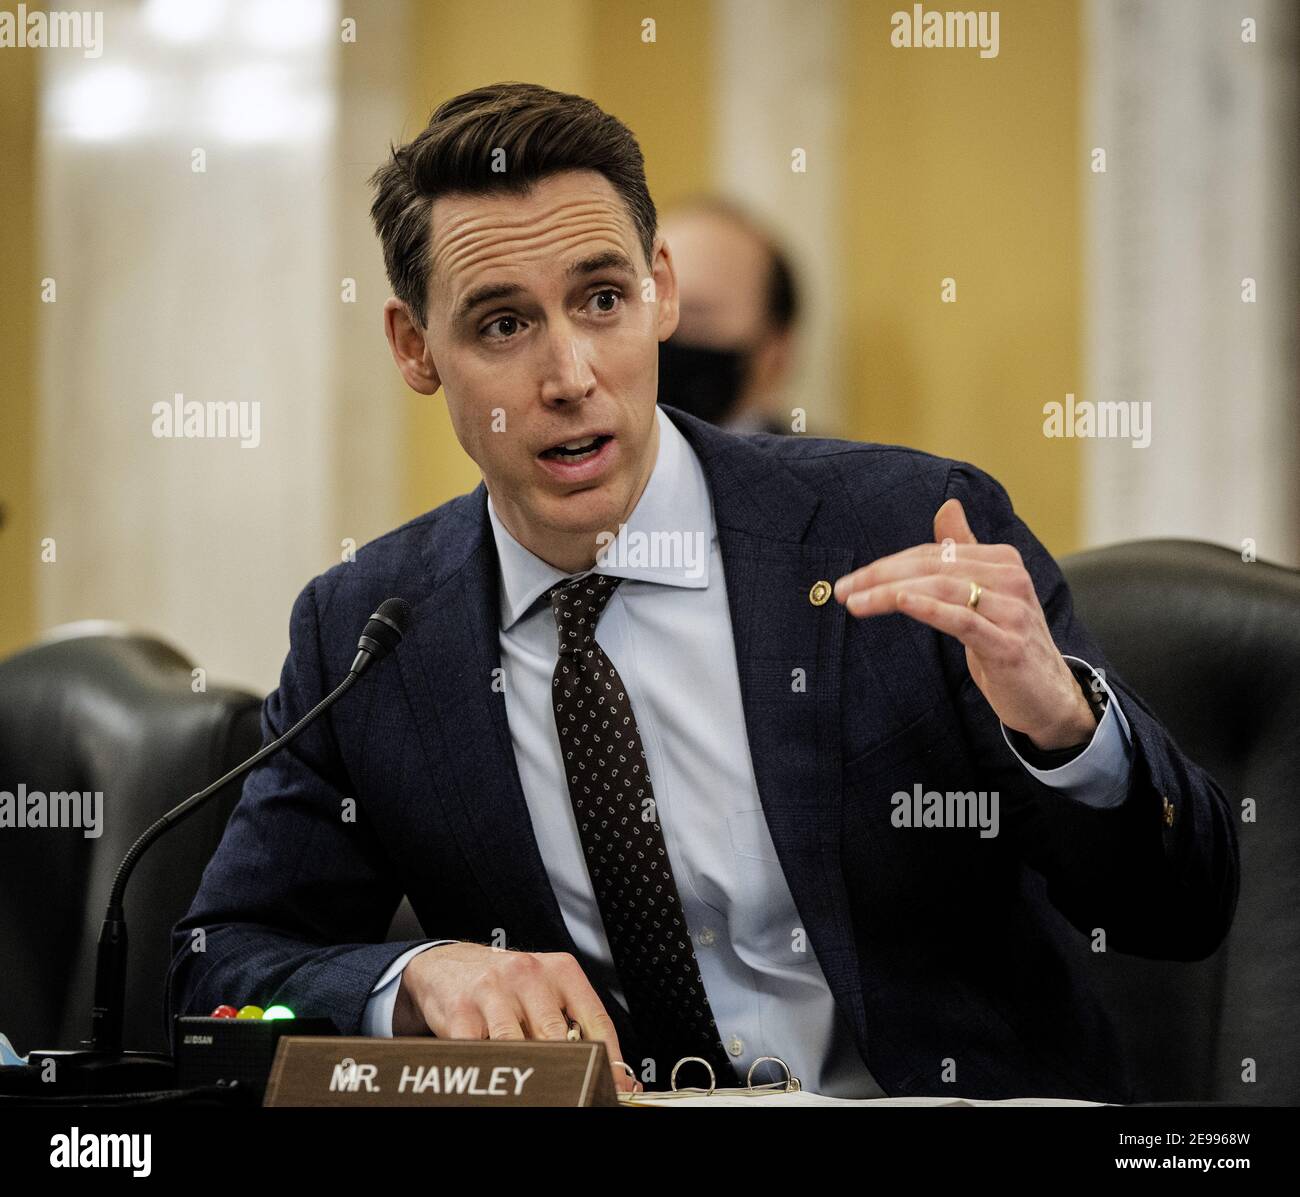 Washington, United States. 03rd Feb, 2021. Sen. Josh Hawley (R-MO), asks questions at the Senate Small Business and Entrepreneurship hearings to consider the nomination of Isabella Casillas Guzman to be Administrator of the Small Business Administration in Washington, DC on Wednesday, February 3, 2021. Pool photo by Bill O'Leary/UPI Credit: UPI/Alamy Live News Stock Photo